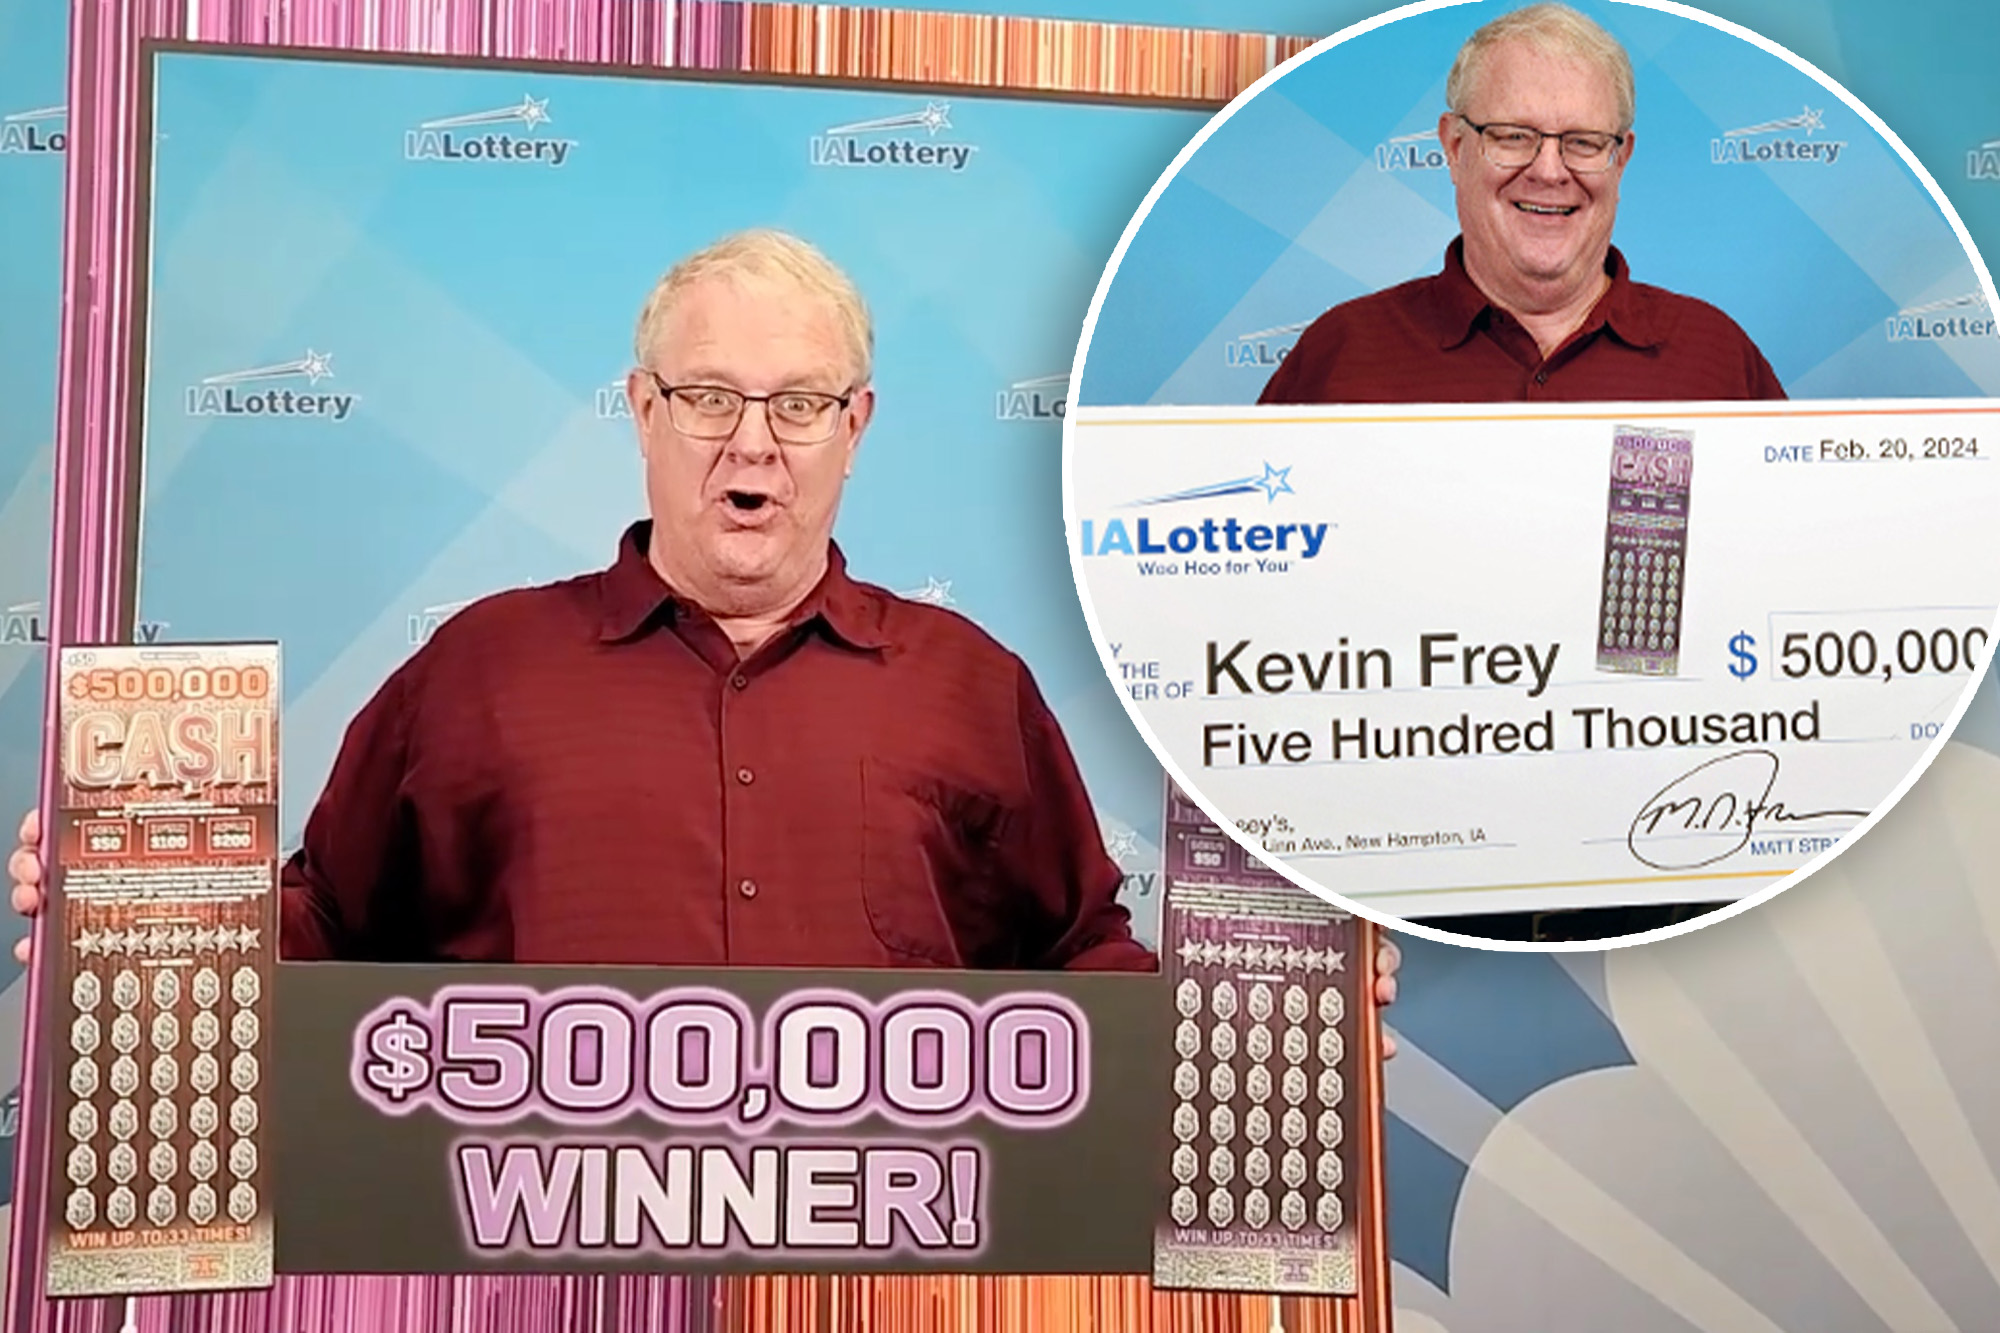 Kevin Frey, a 64-year-old pastor, forgot his winning lottery ticket inside an Iowa general store.